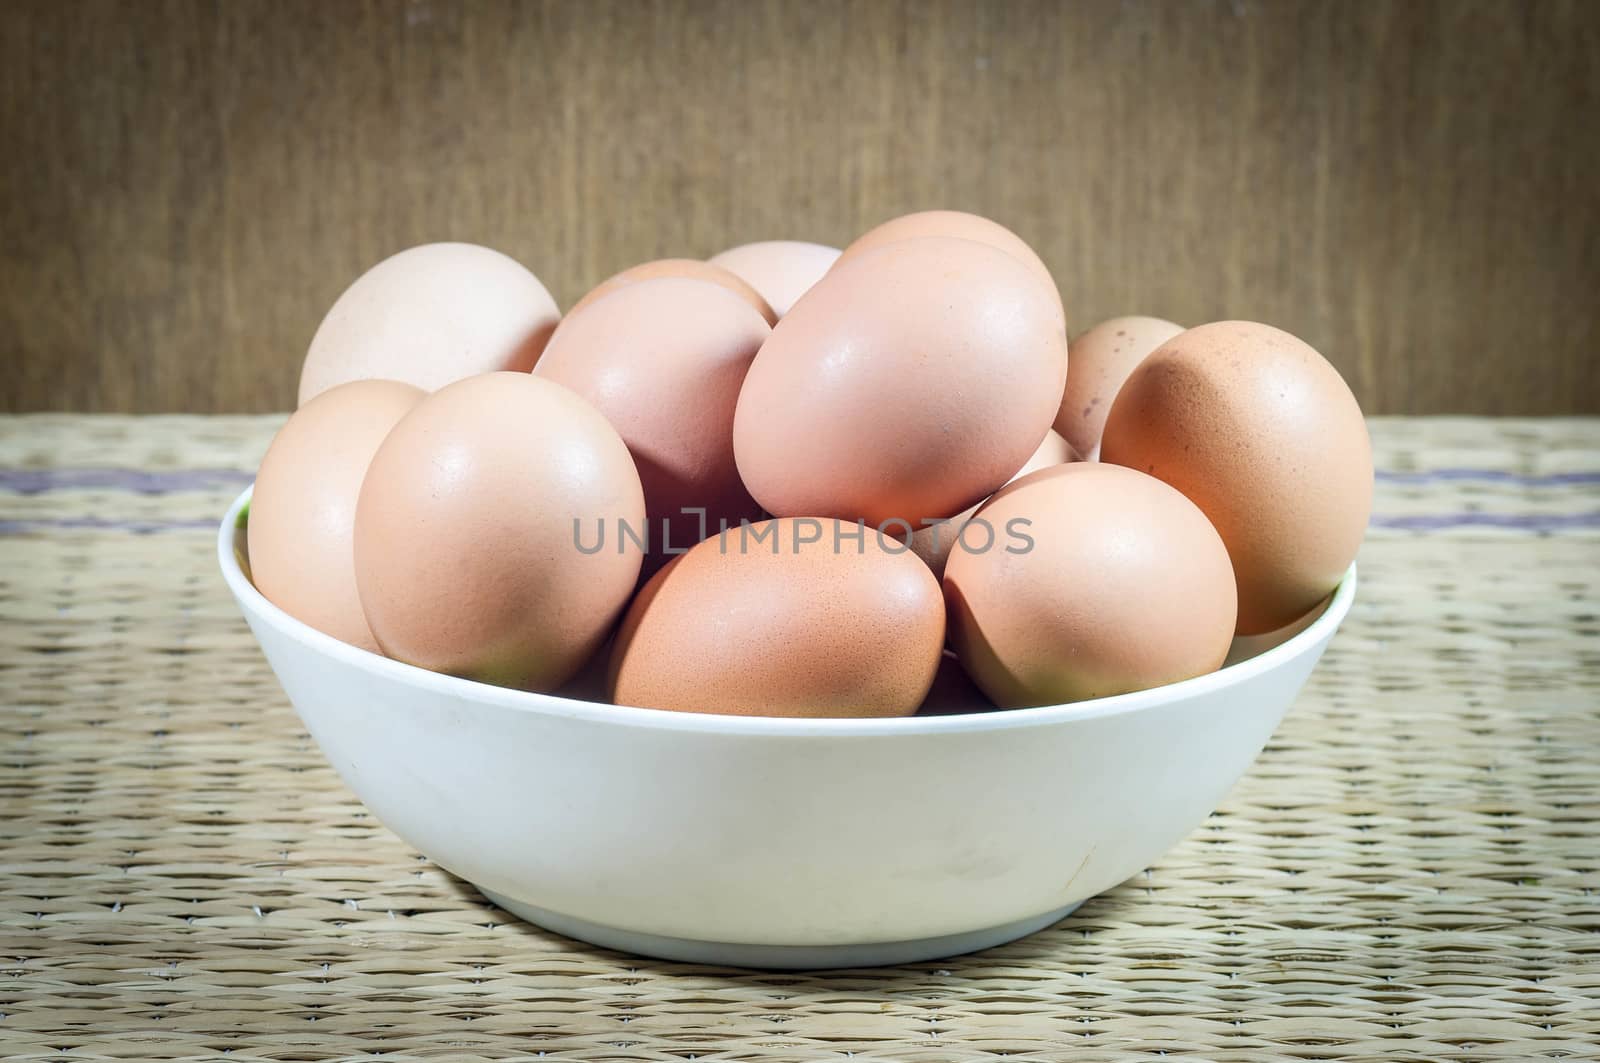 Chicken eggs in a dish on wood background.